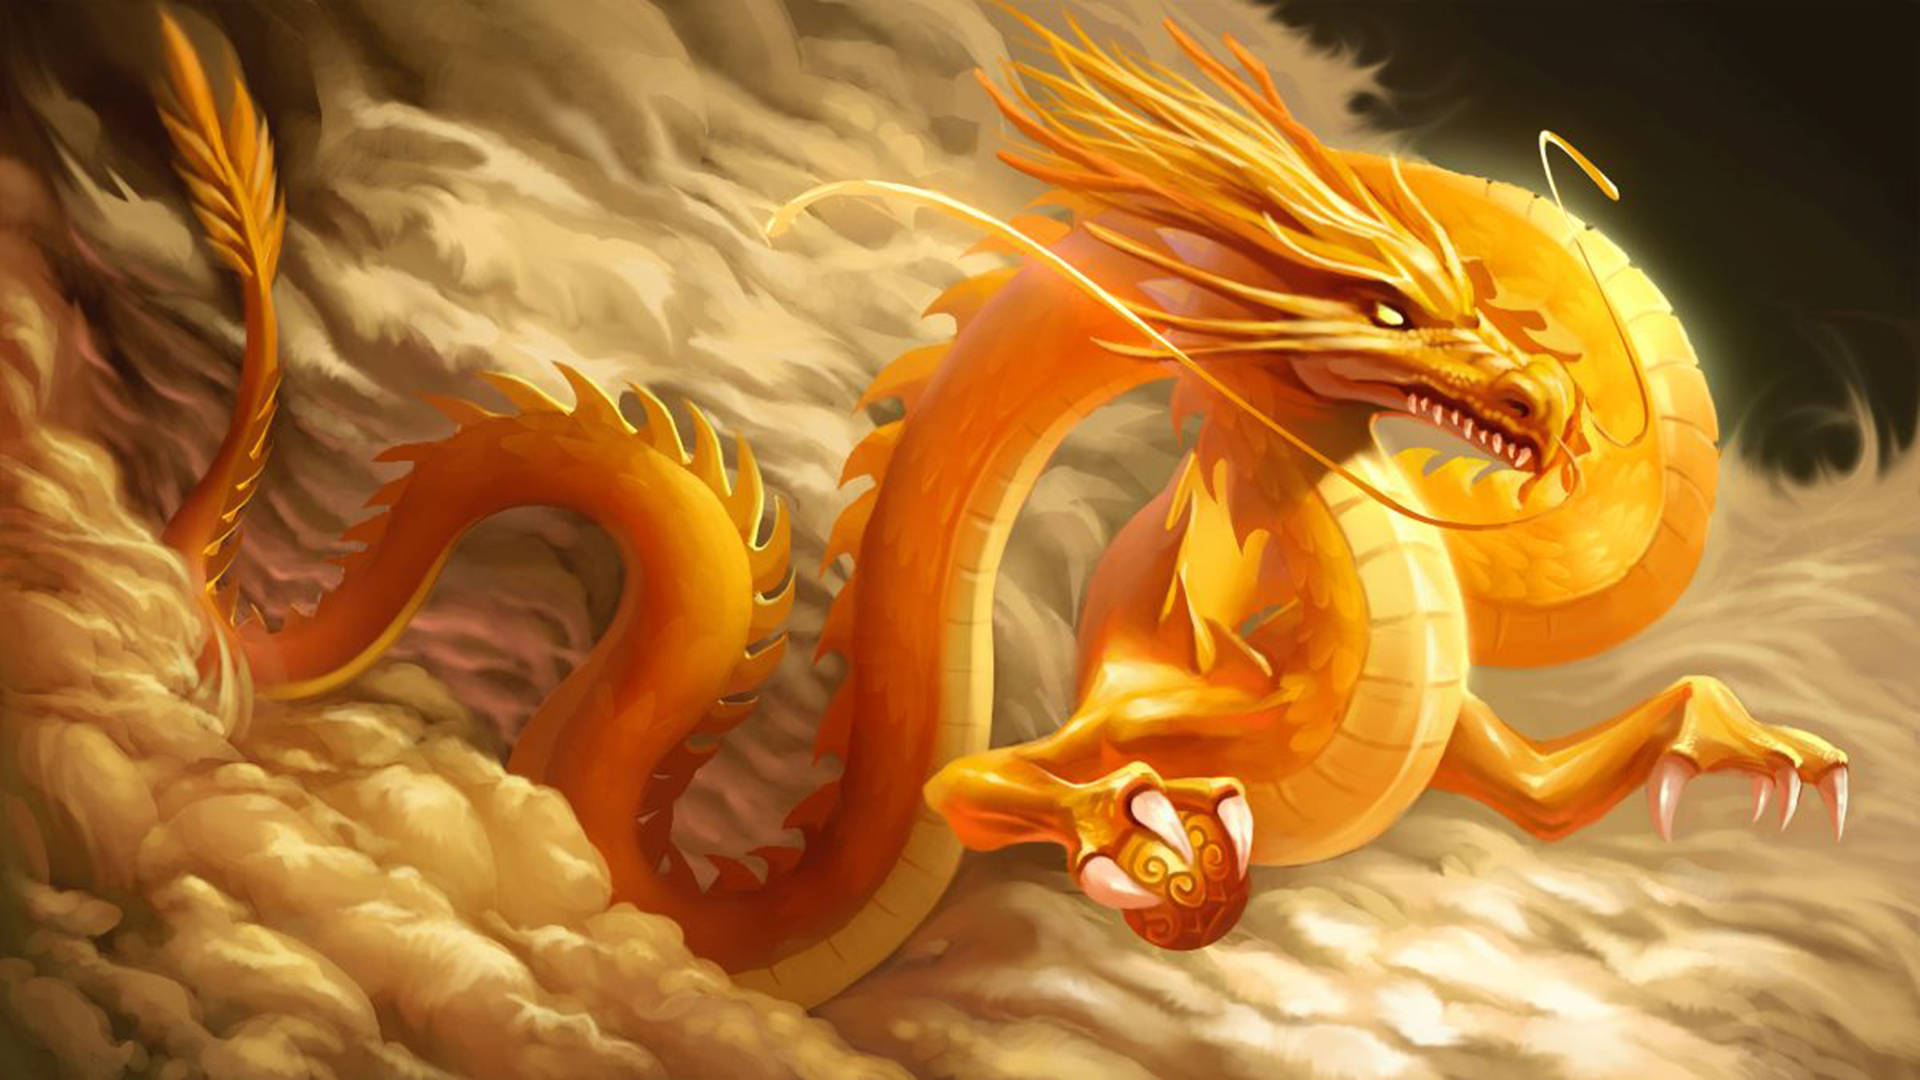 Mythical Chinese Water Dragon Wallpapers